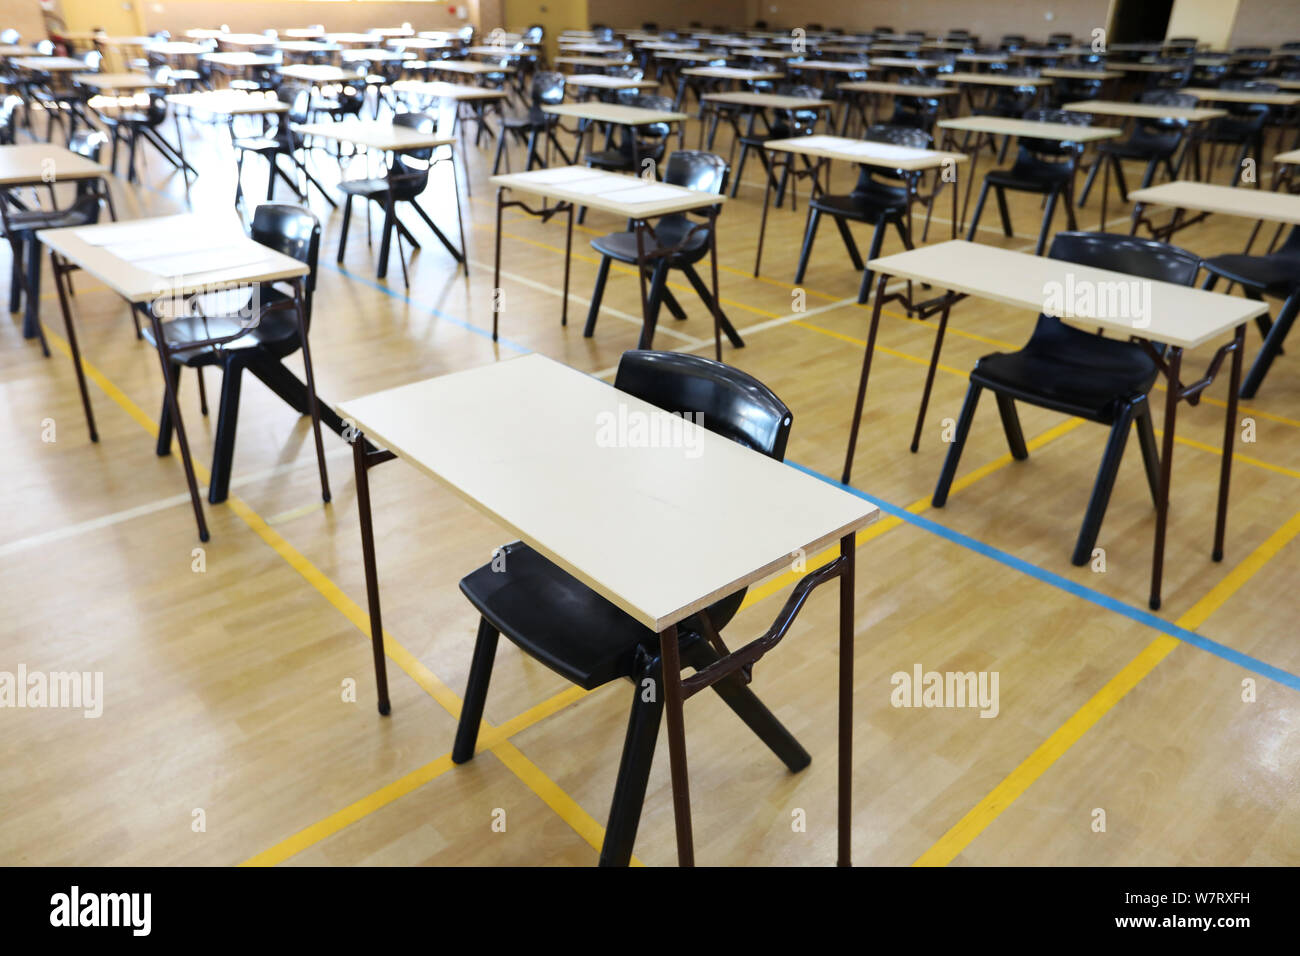 view of an exam examination room or hall set up ready for students to sit test. multiple desks tables and chairs. Education, school, student life conc Stock Photo